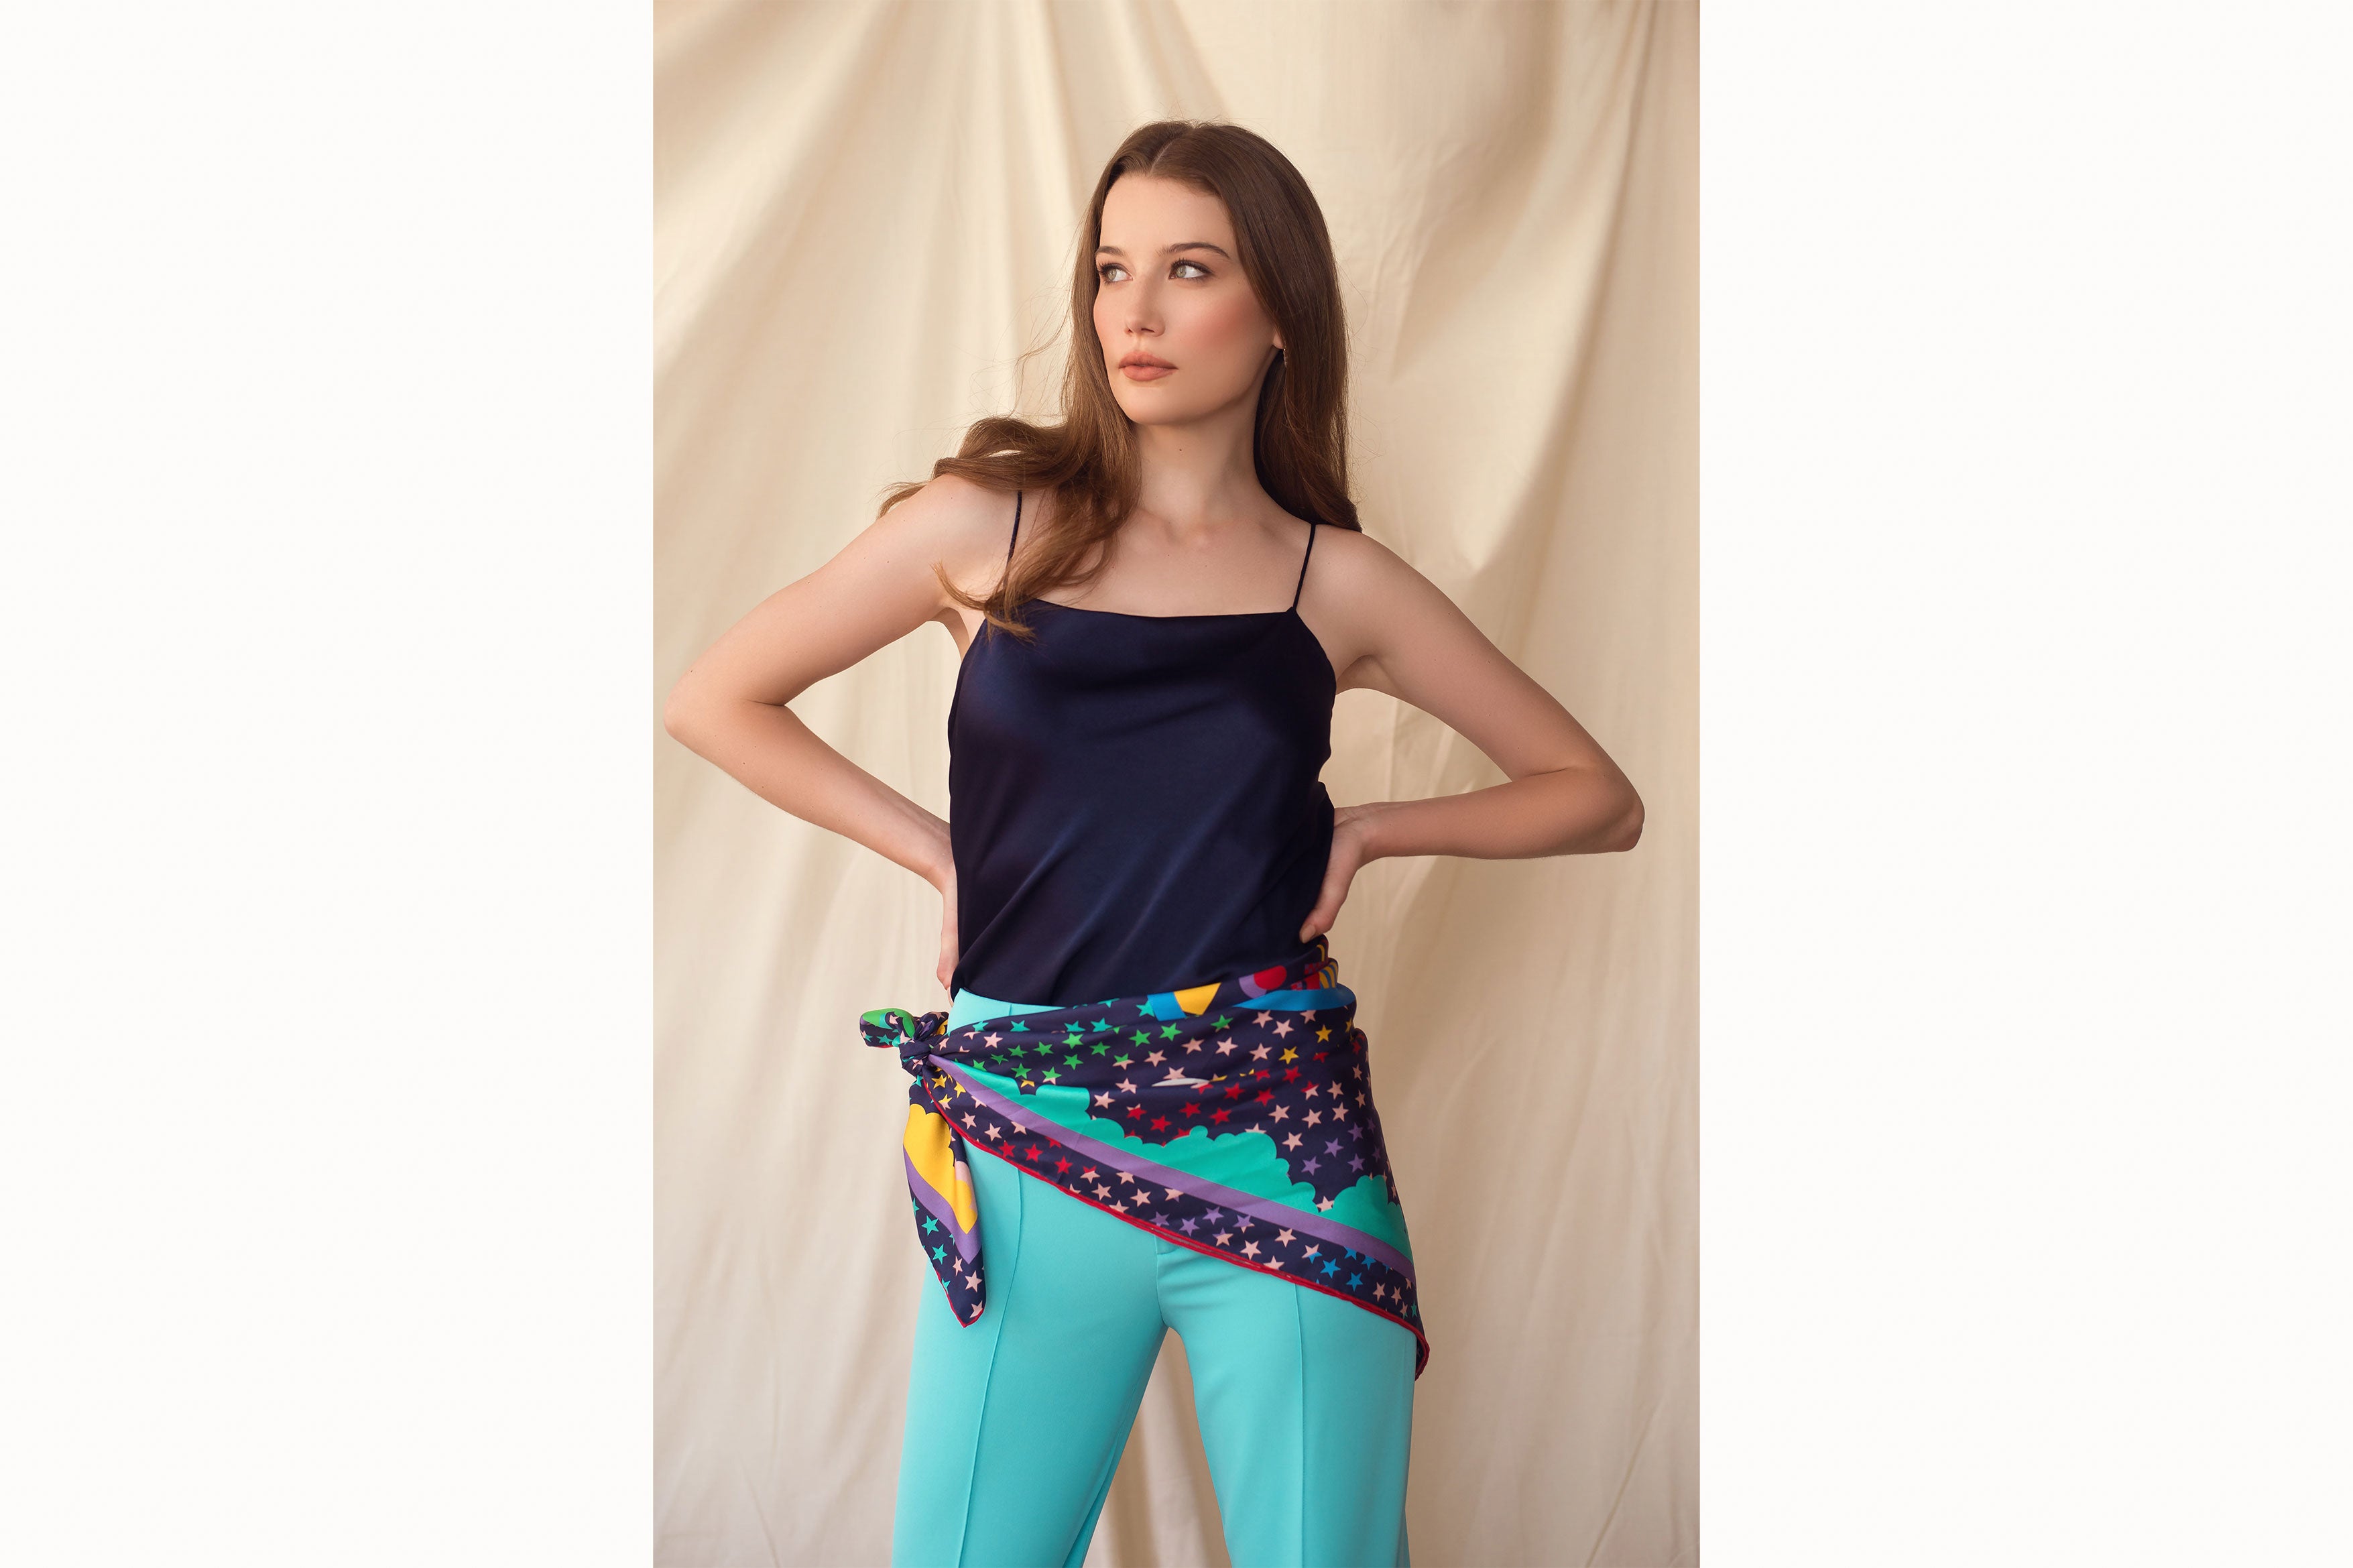 Image of female model standing with hands on hips while wearing the scarf tied around her waist. Model is also wearing a navy tank top and turquoise trousers.